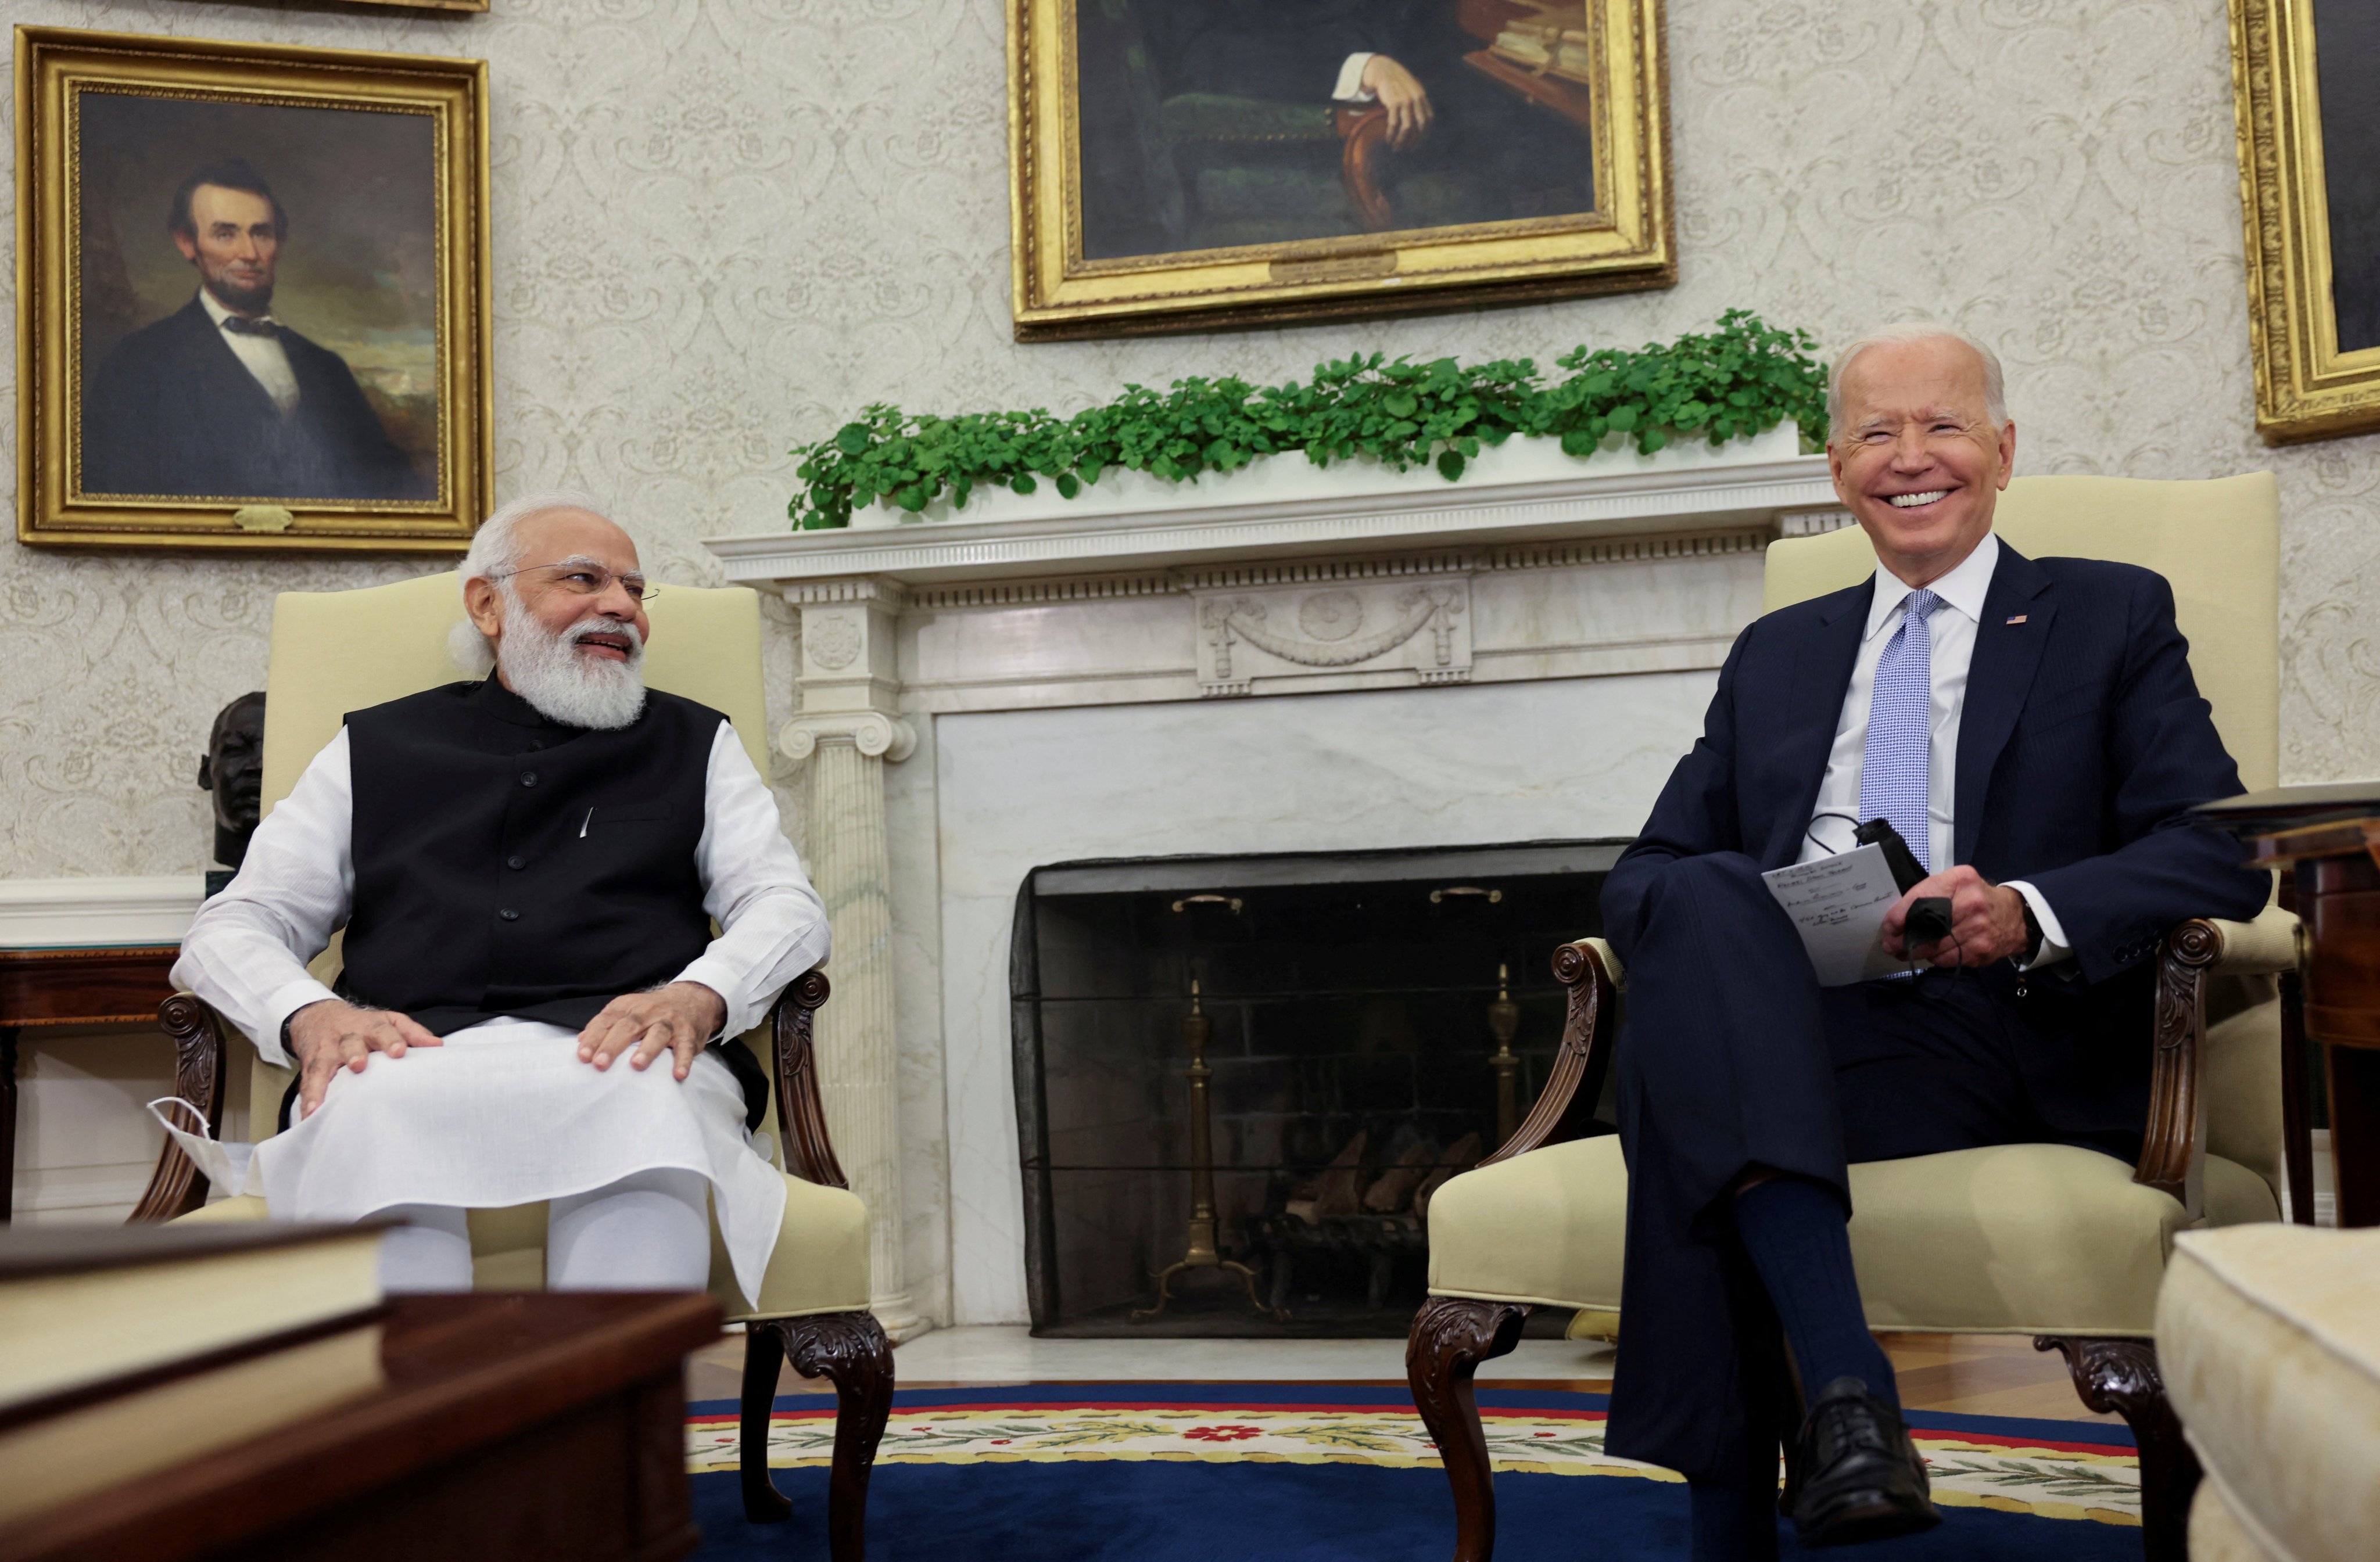 Indian Prime Minister Narendra Modi meets US President Joe Biden in the Oval Office at the White House in Washington on September 24, 2021. Photo: Reuters